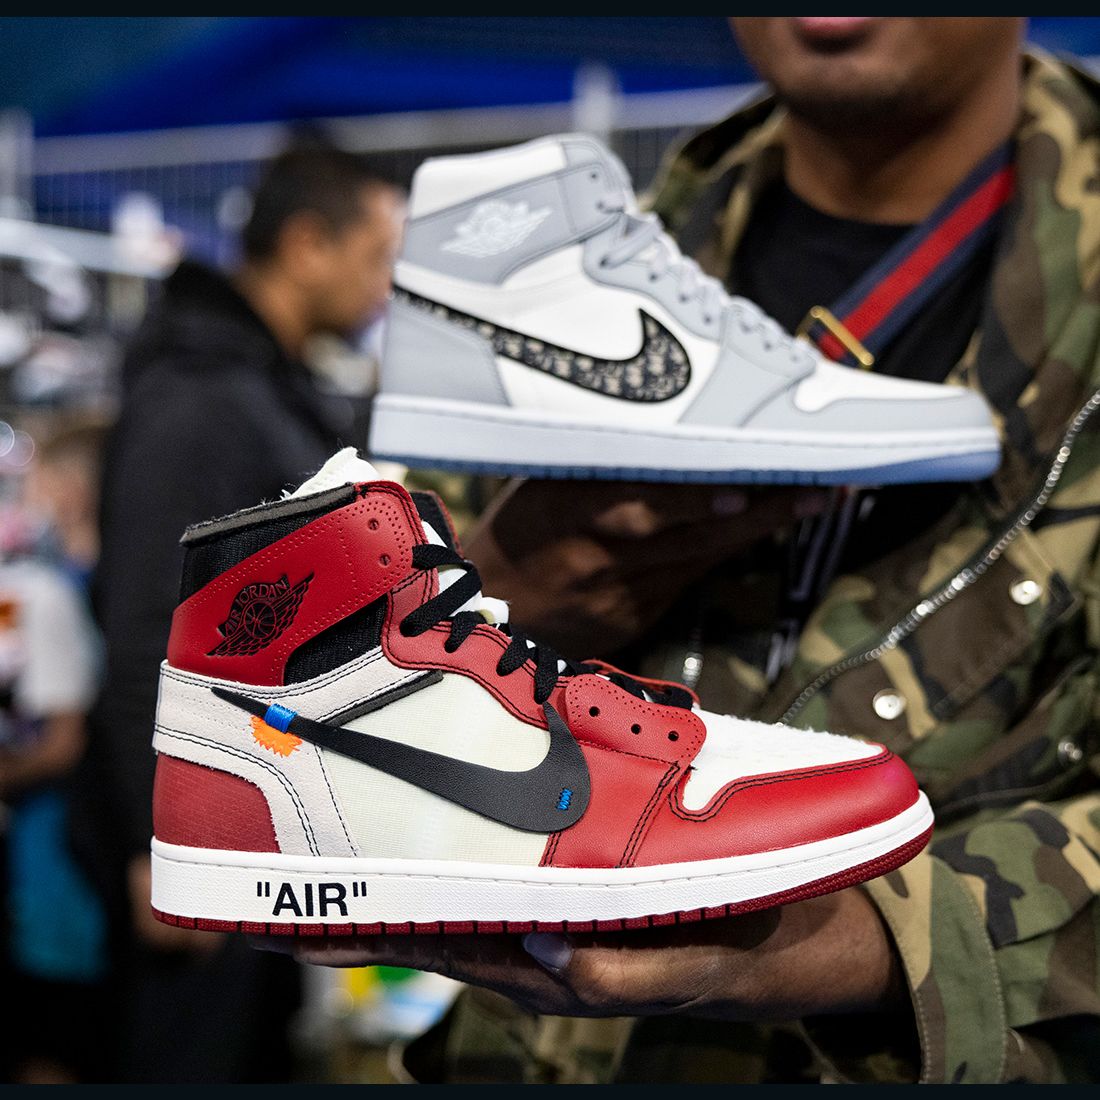 How sneakers came to cultural currency CNN